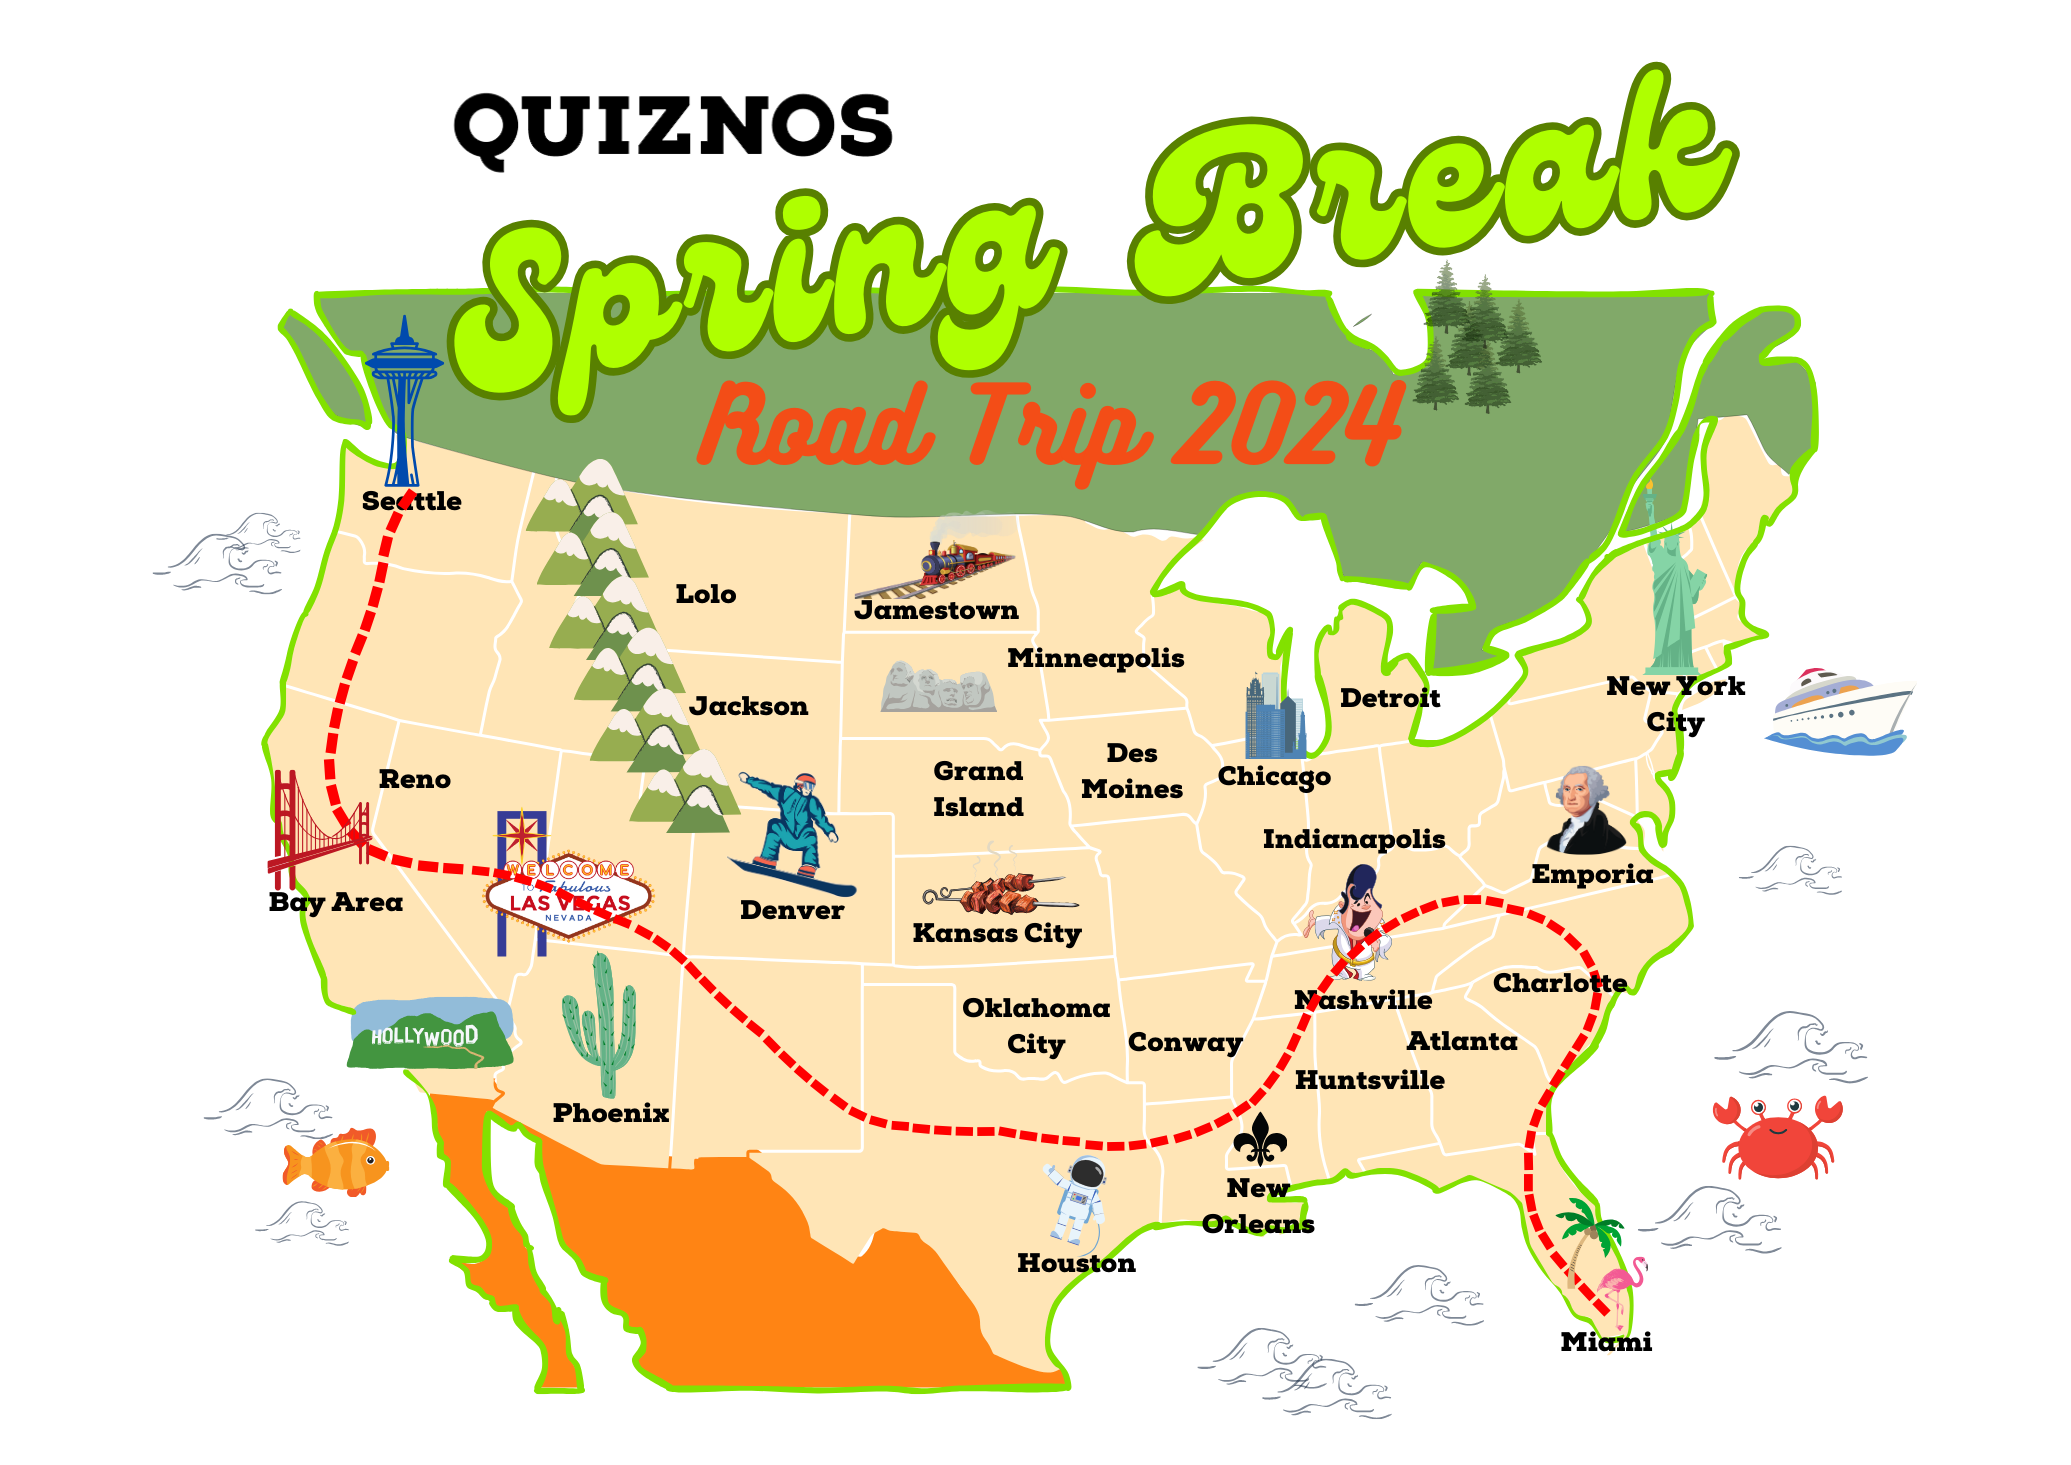 Quiznos awarding $5,000 to the Spring Break road tripper who snaps up the most subs